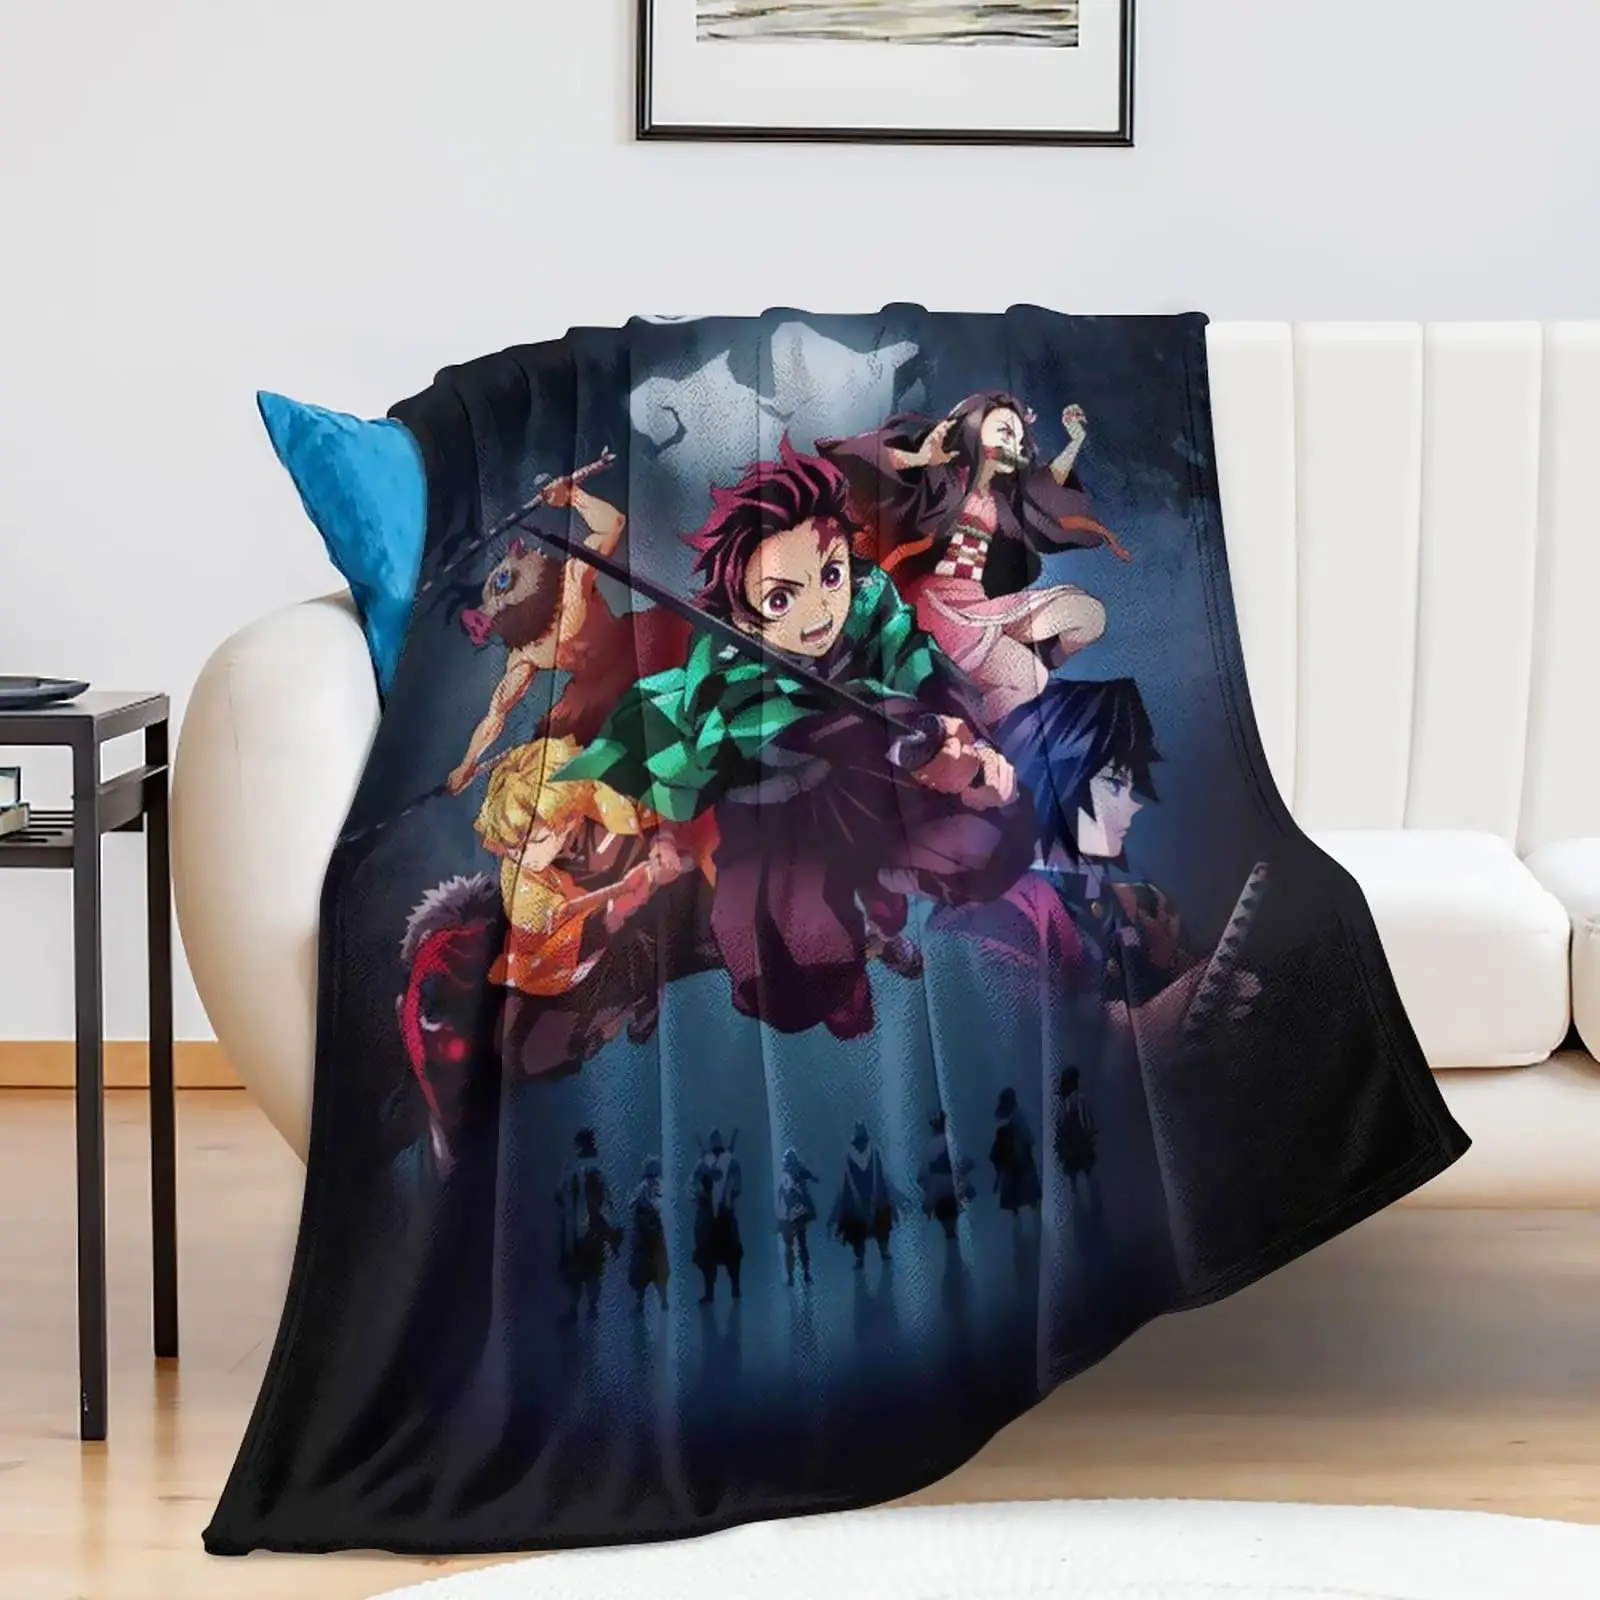 

Flannel D-Demon S-Slayer Blanket Washable Sofa Cover Hiking Picnic Fashionable Leisure Napping Throw Blankets